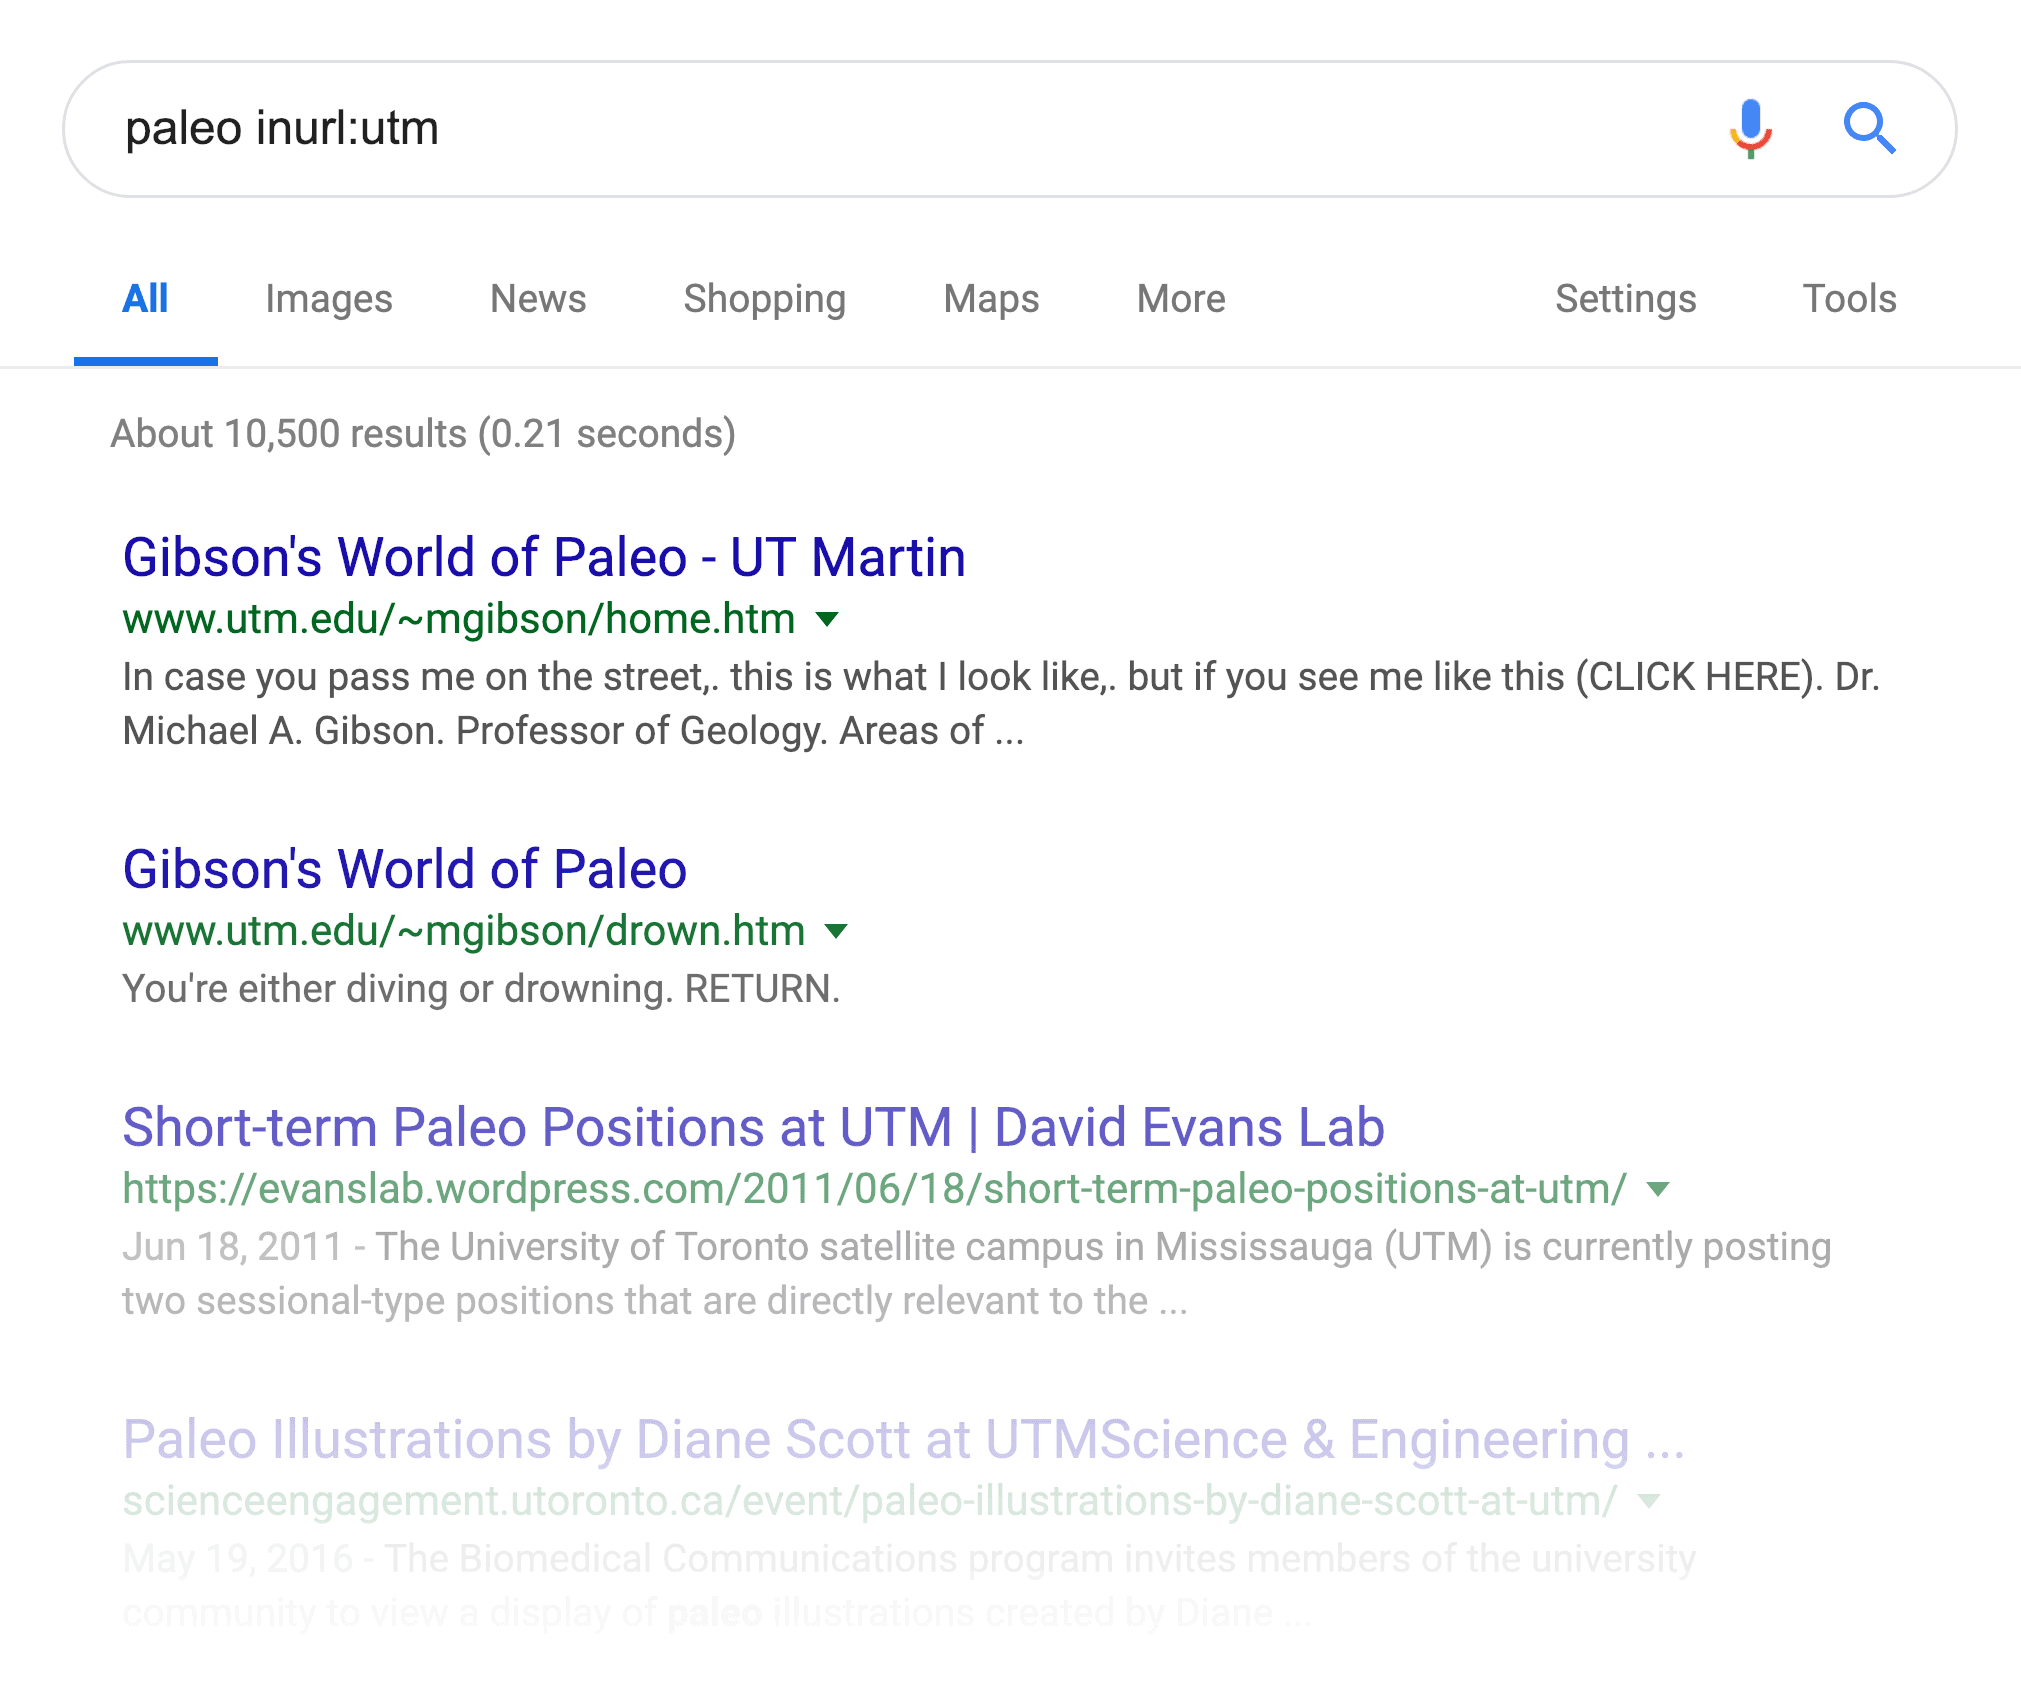 Dynamic URLs are long and get cut off in the search results